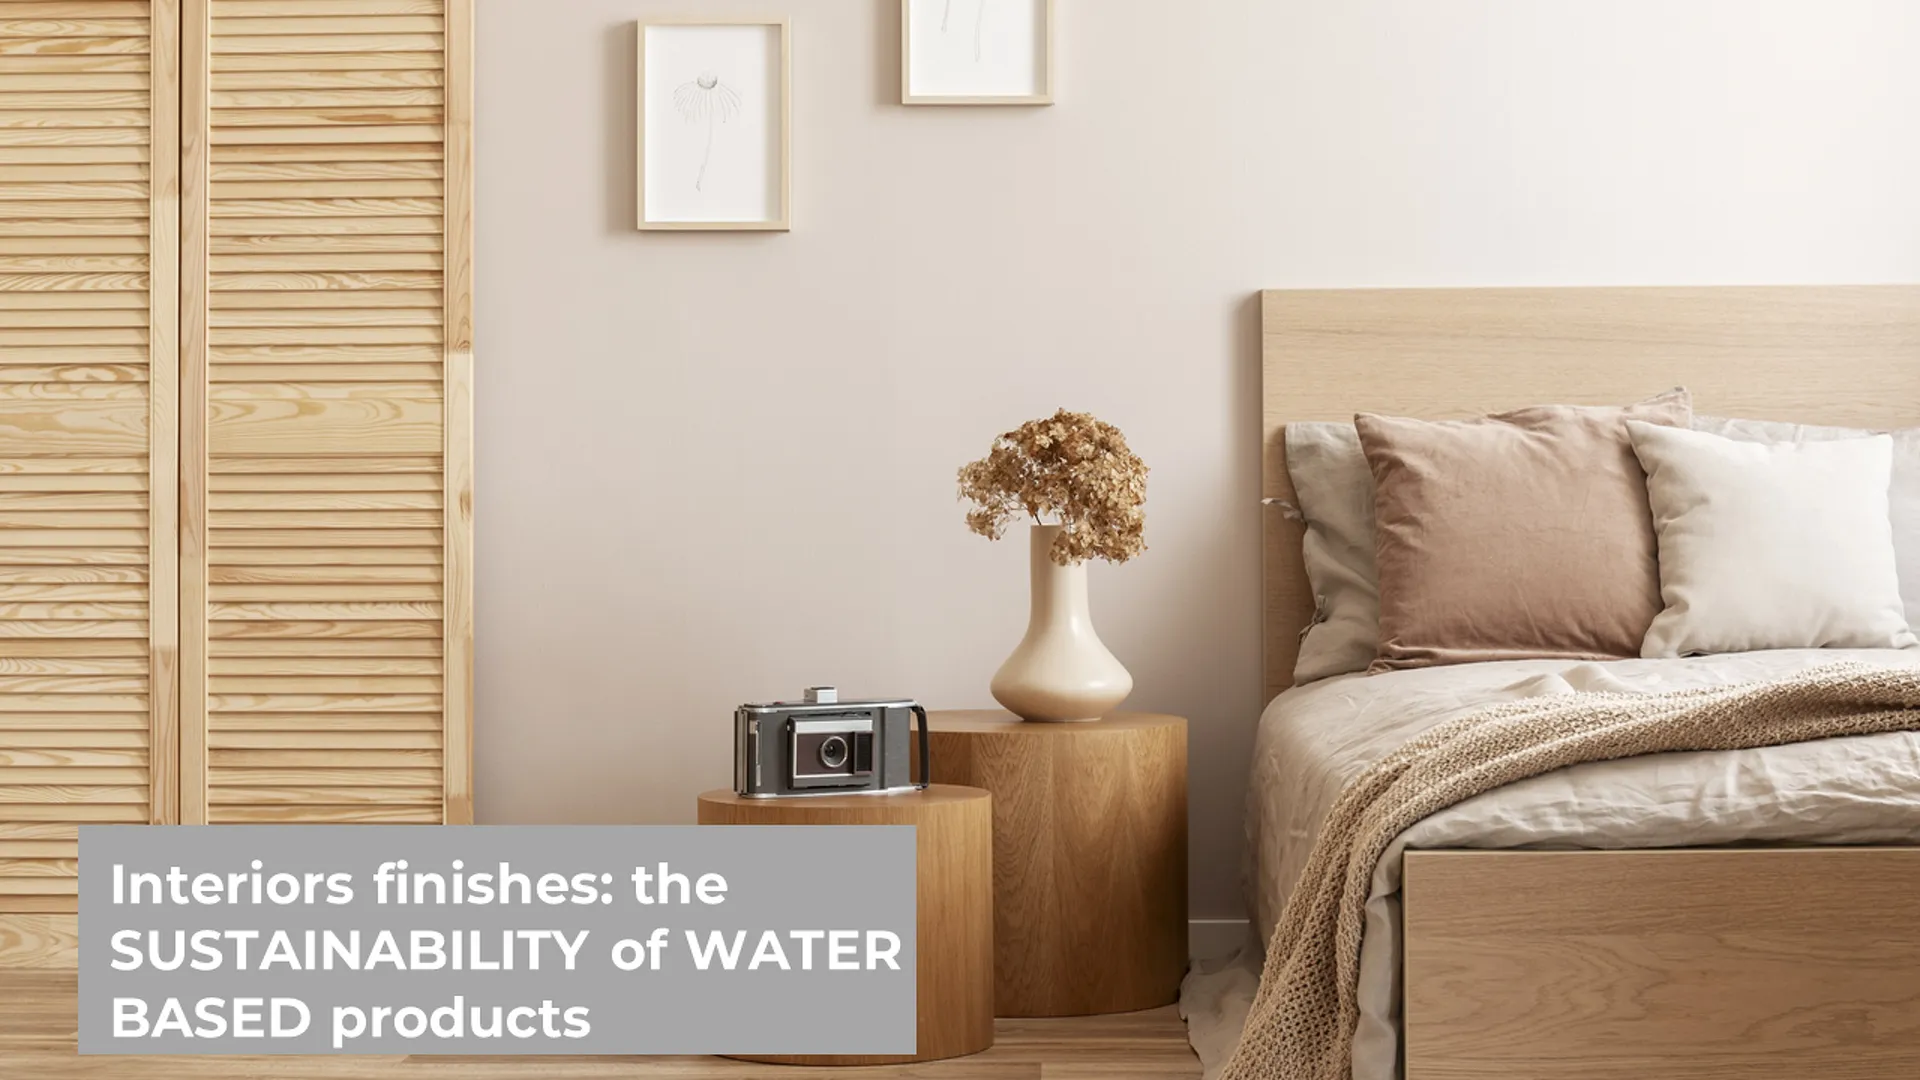 Interior finishes: the SUSTAINABILITY of WATER-BASED PRODUCTS